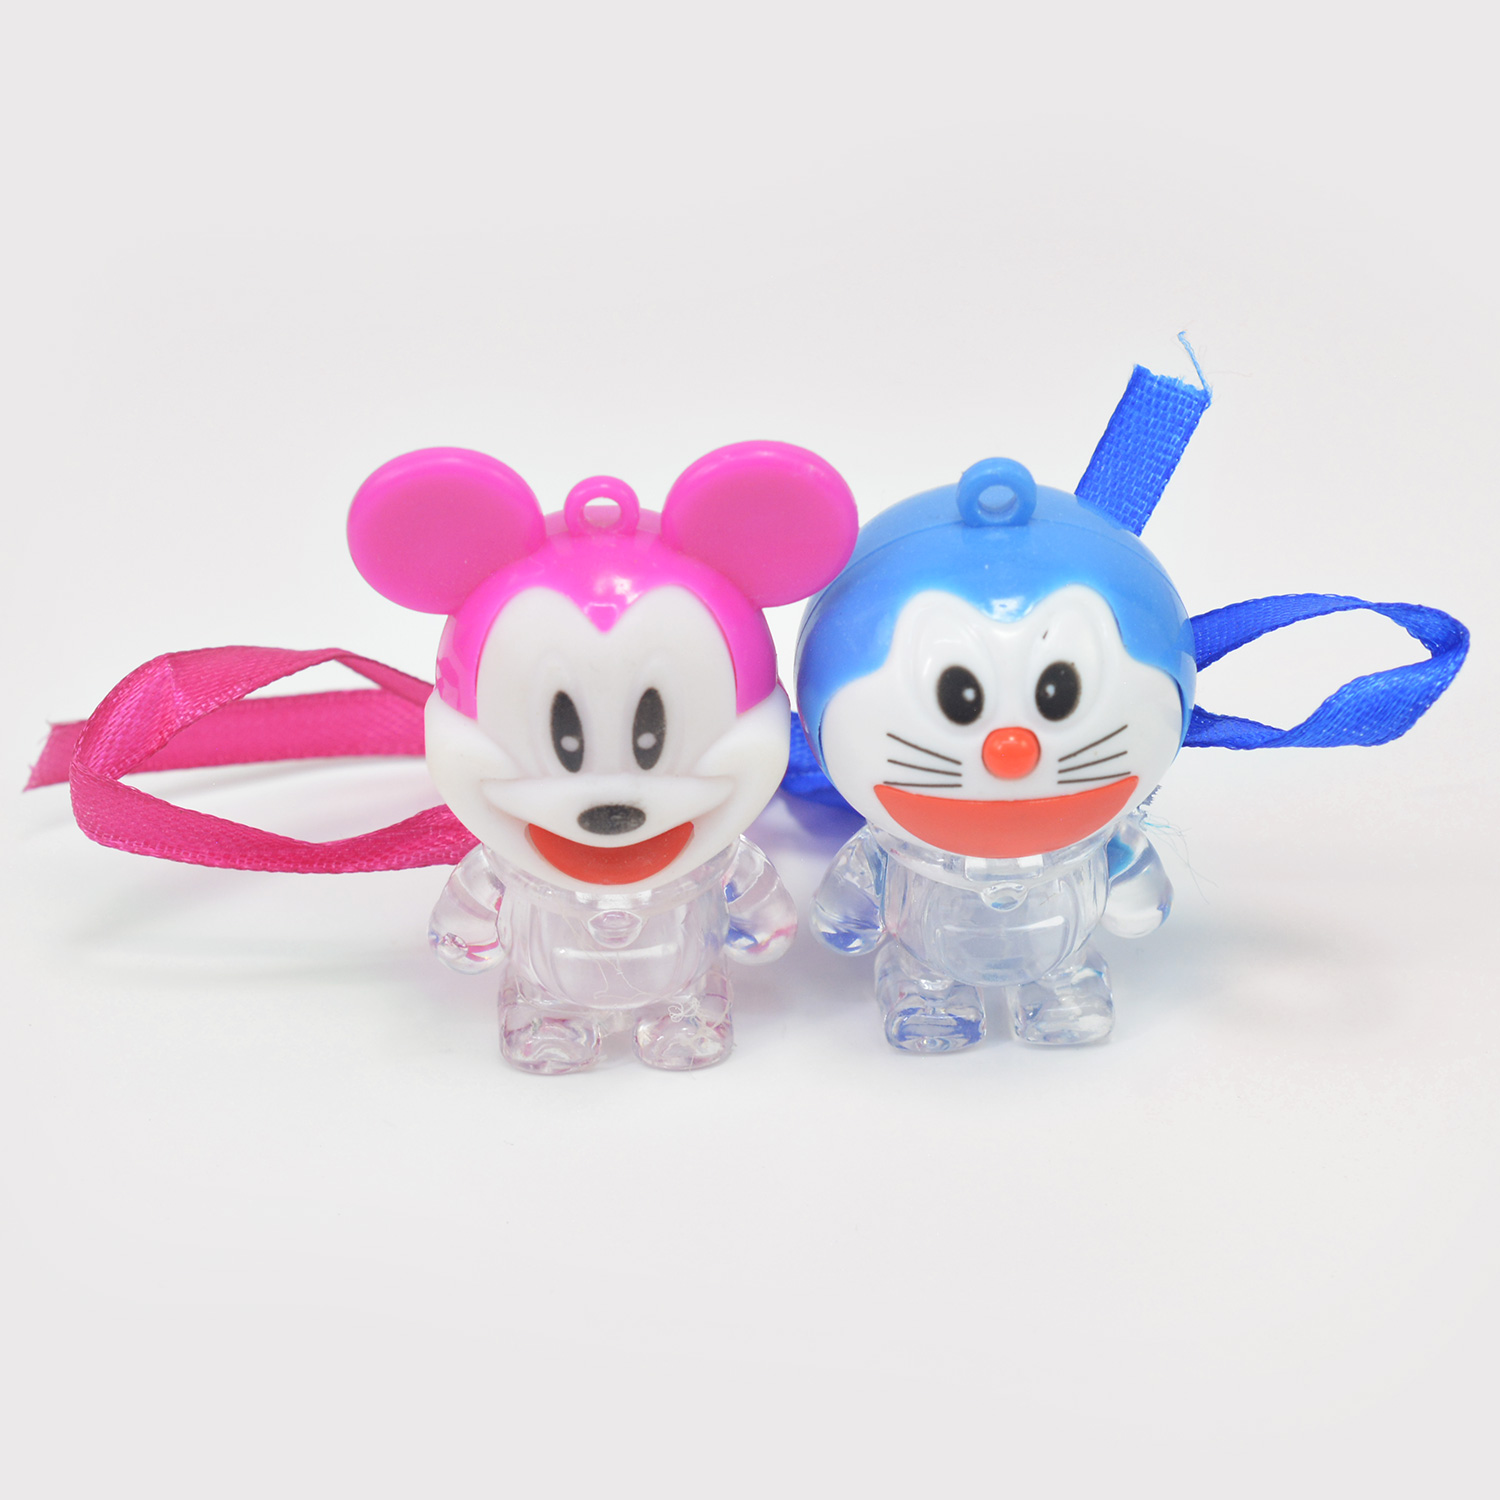 Minnie Mouse and Doremon Toy Rakhi for Girl and Boy Kid